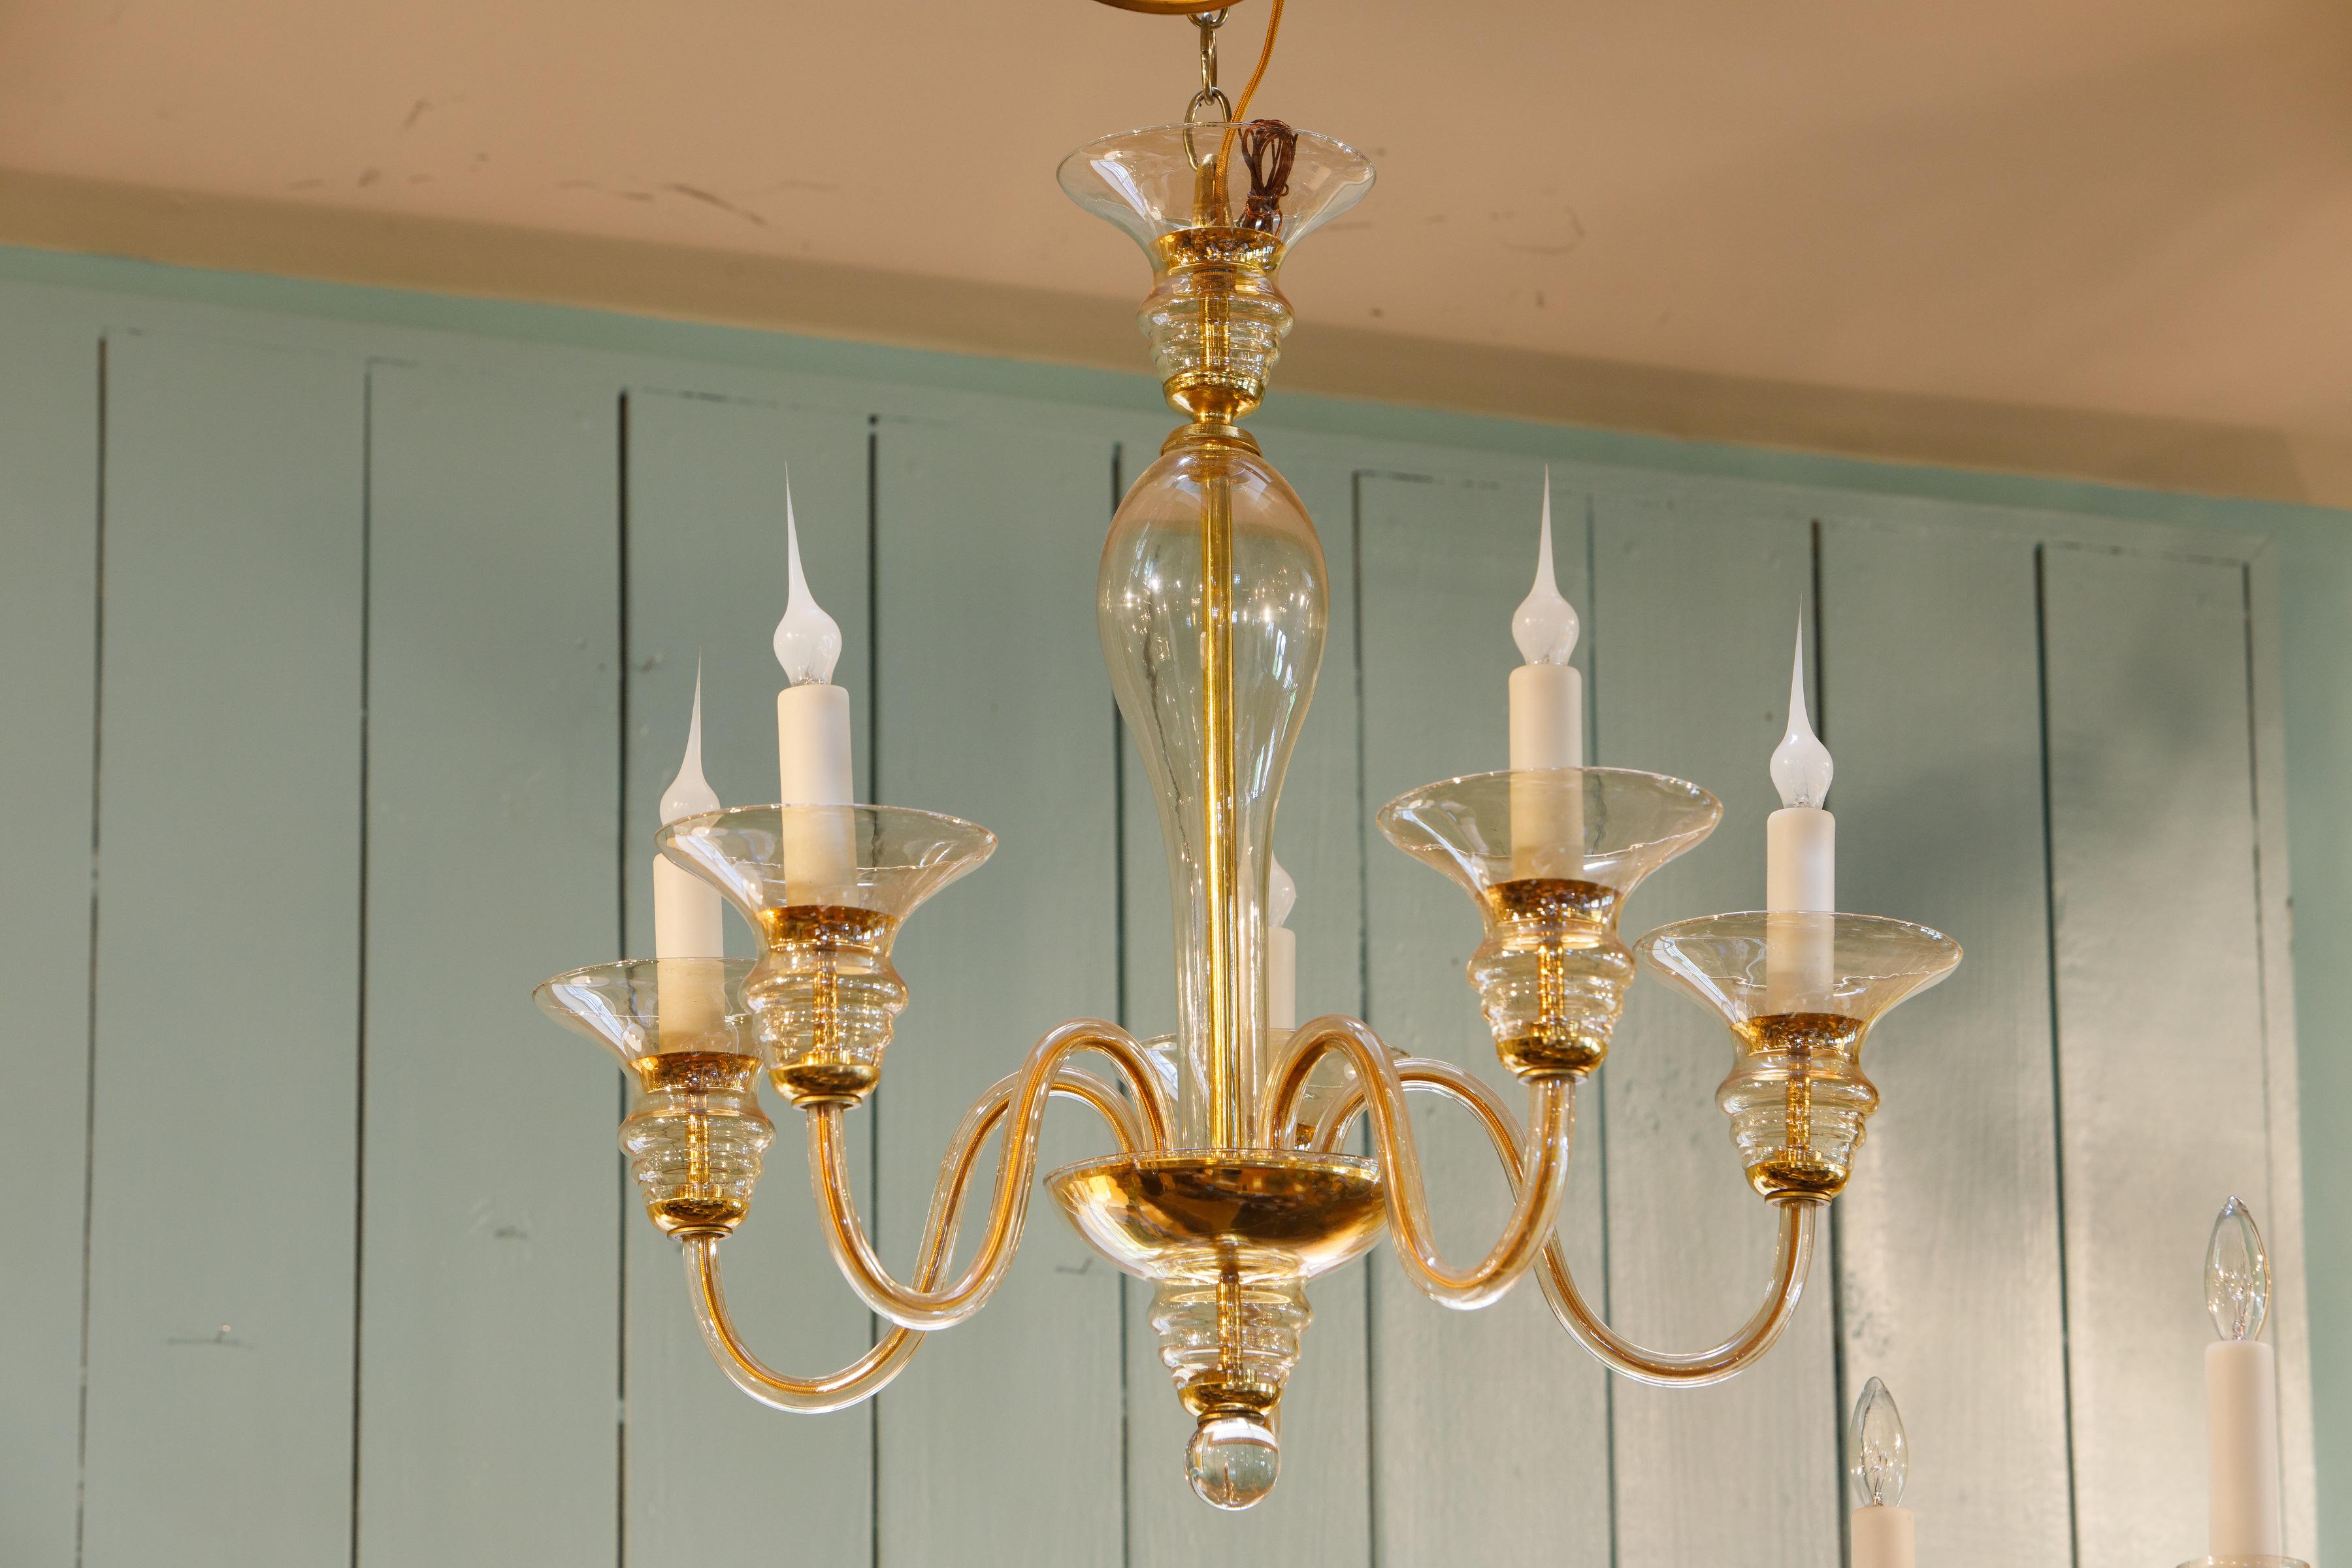 Vintage hand-blown Italian Murano amber/ champagne glass chandelier with five arms. This vintage one-of-a-kind hand blown glass fixture fits well within many styles of interiors. Newly wired for use within the USA. Includes chain and a canopy. We